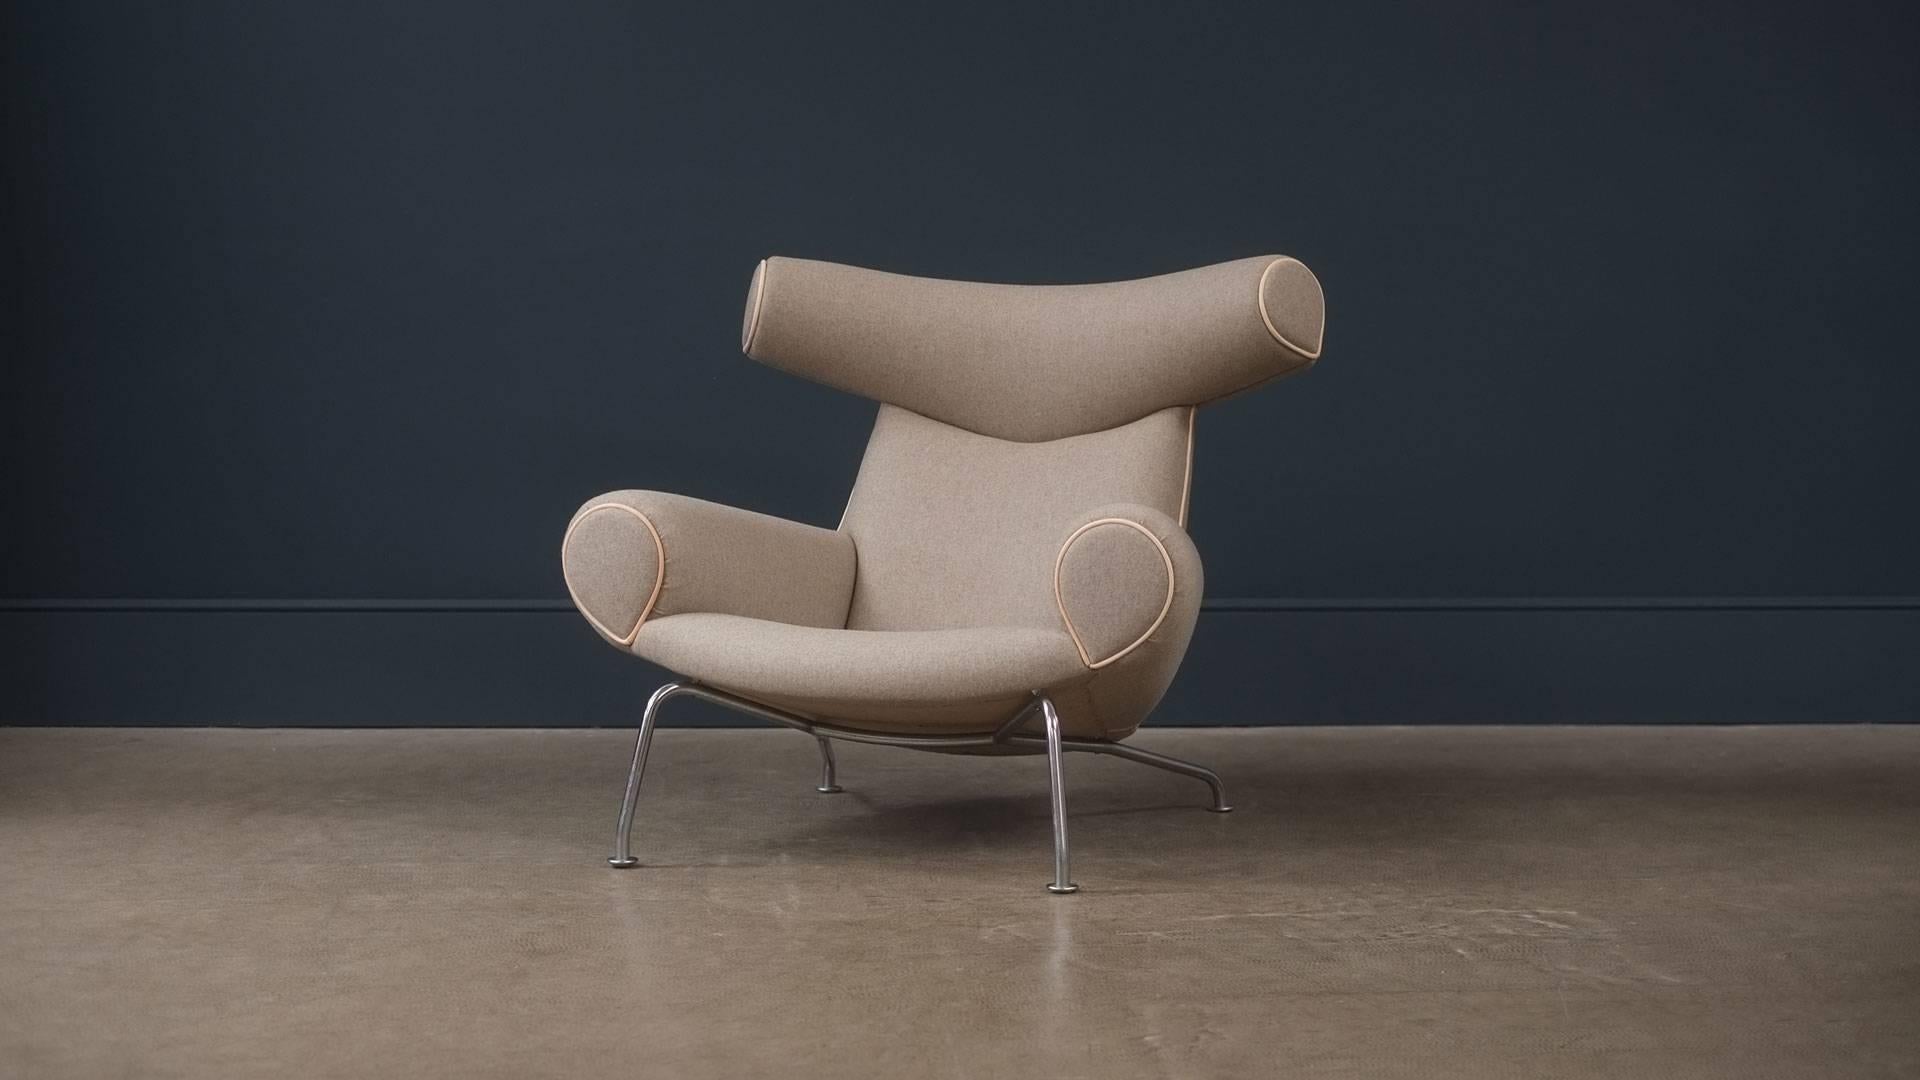 Amazing original Ox chair, model AP46, designed by Hans Wegner for AP Stolen, Denmark, 1960. Early example fully refurbished and reupholstered in grey / beige wool by Warwick and natural leather piping. Wonderful and ultra rare piece of super